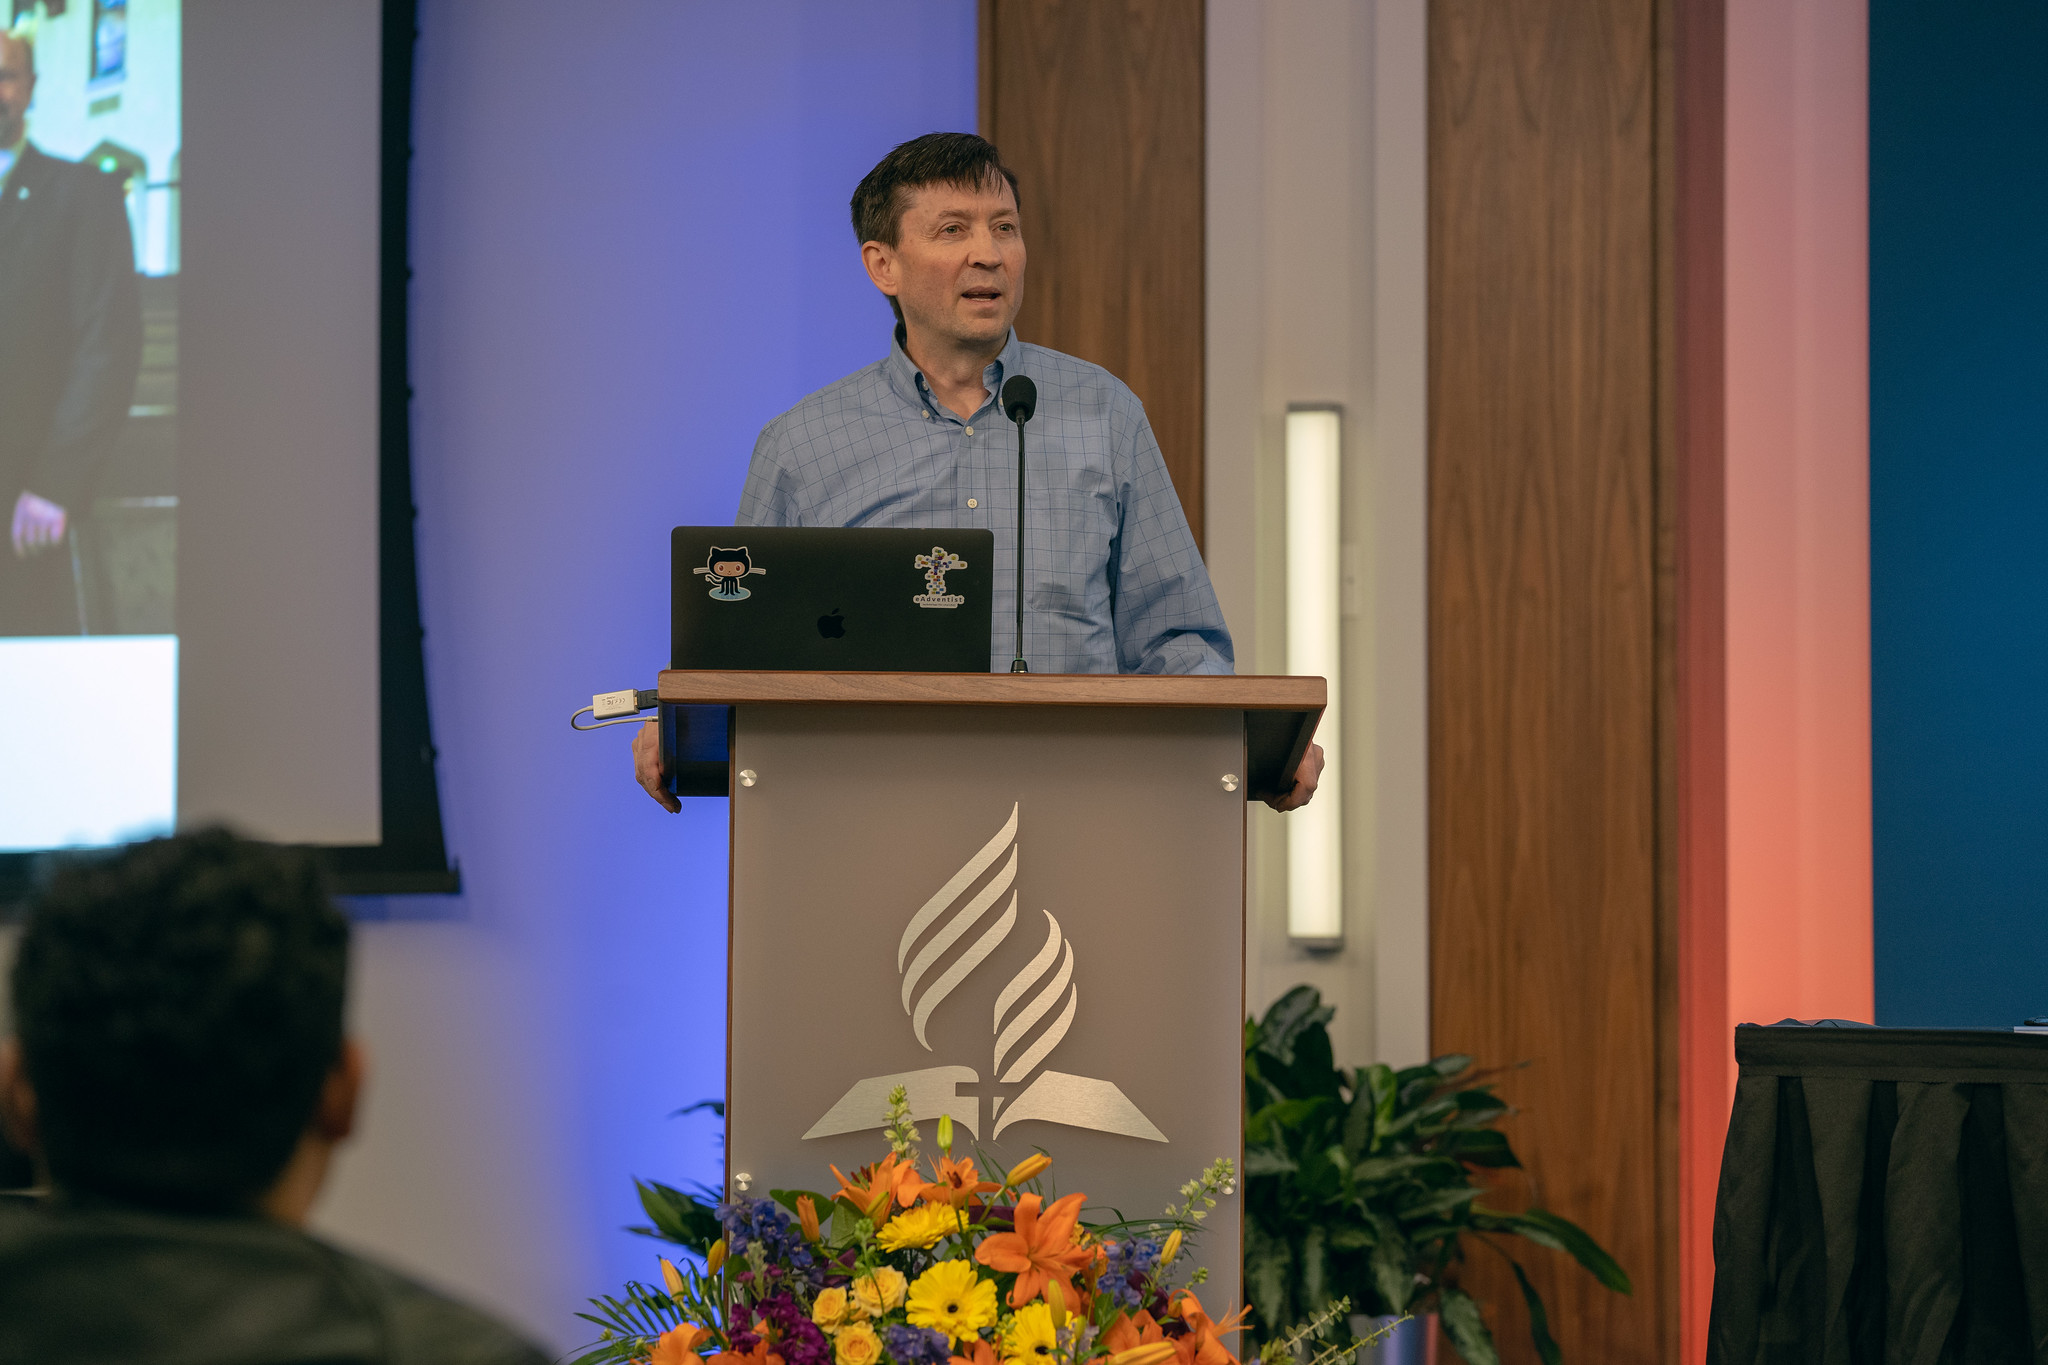 Brian Ford, assistant director for eAdventist, shares how this ministry can help local conferences and unions. Photo by Pieter Damsteegt